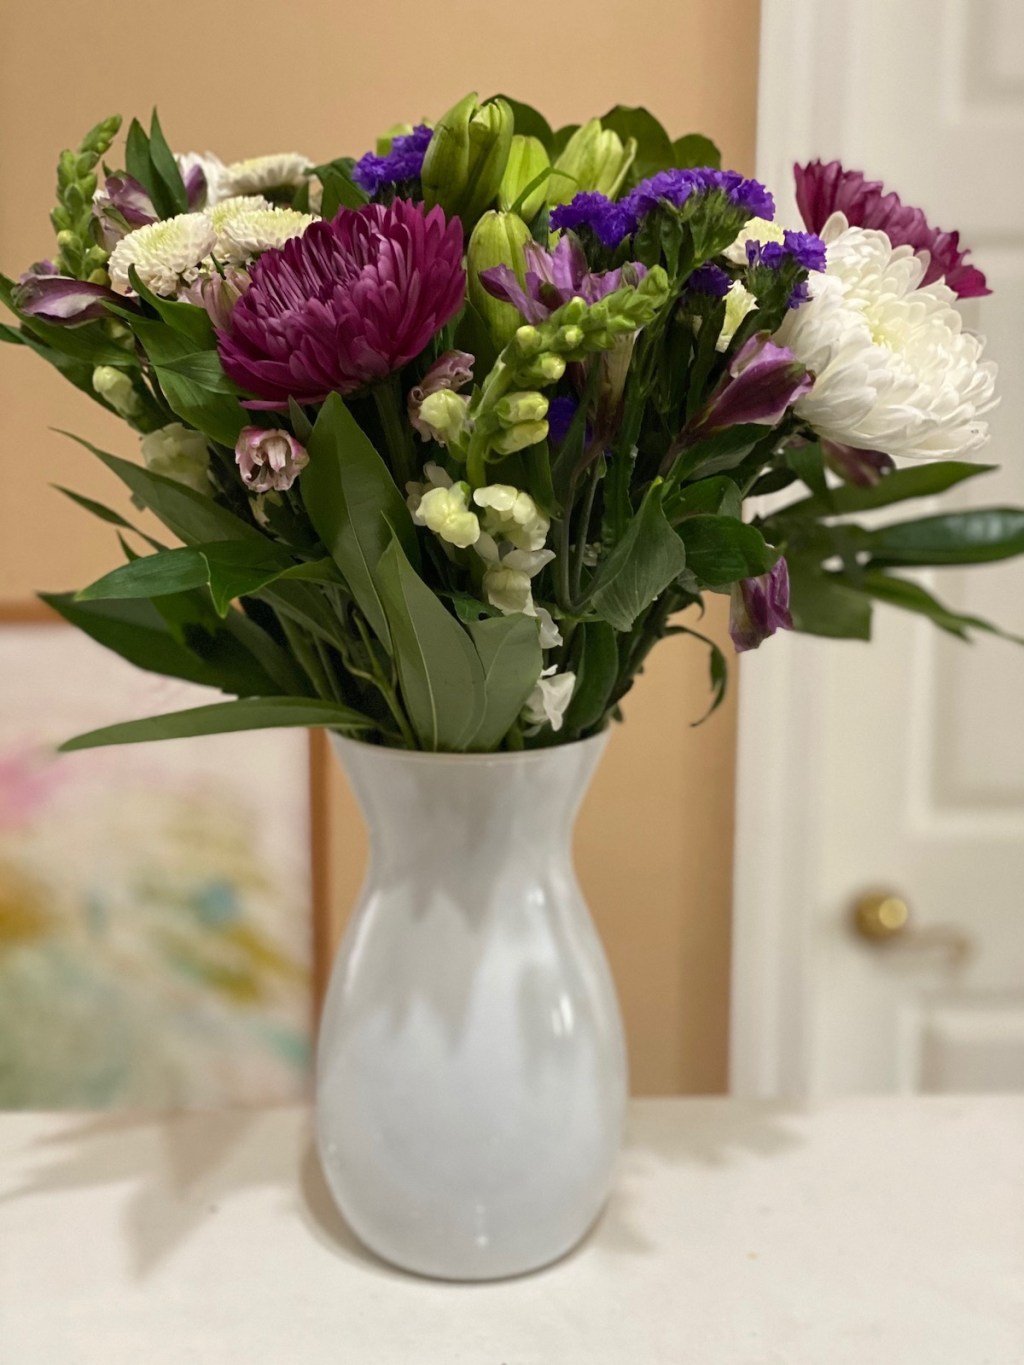 bouquet of flowers sitting in vase on counter